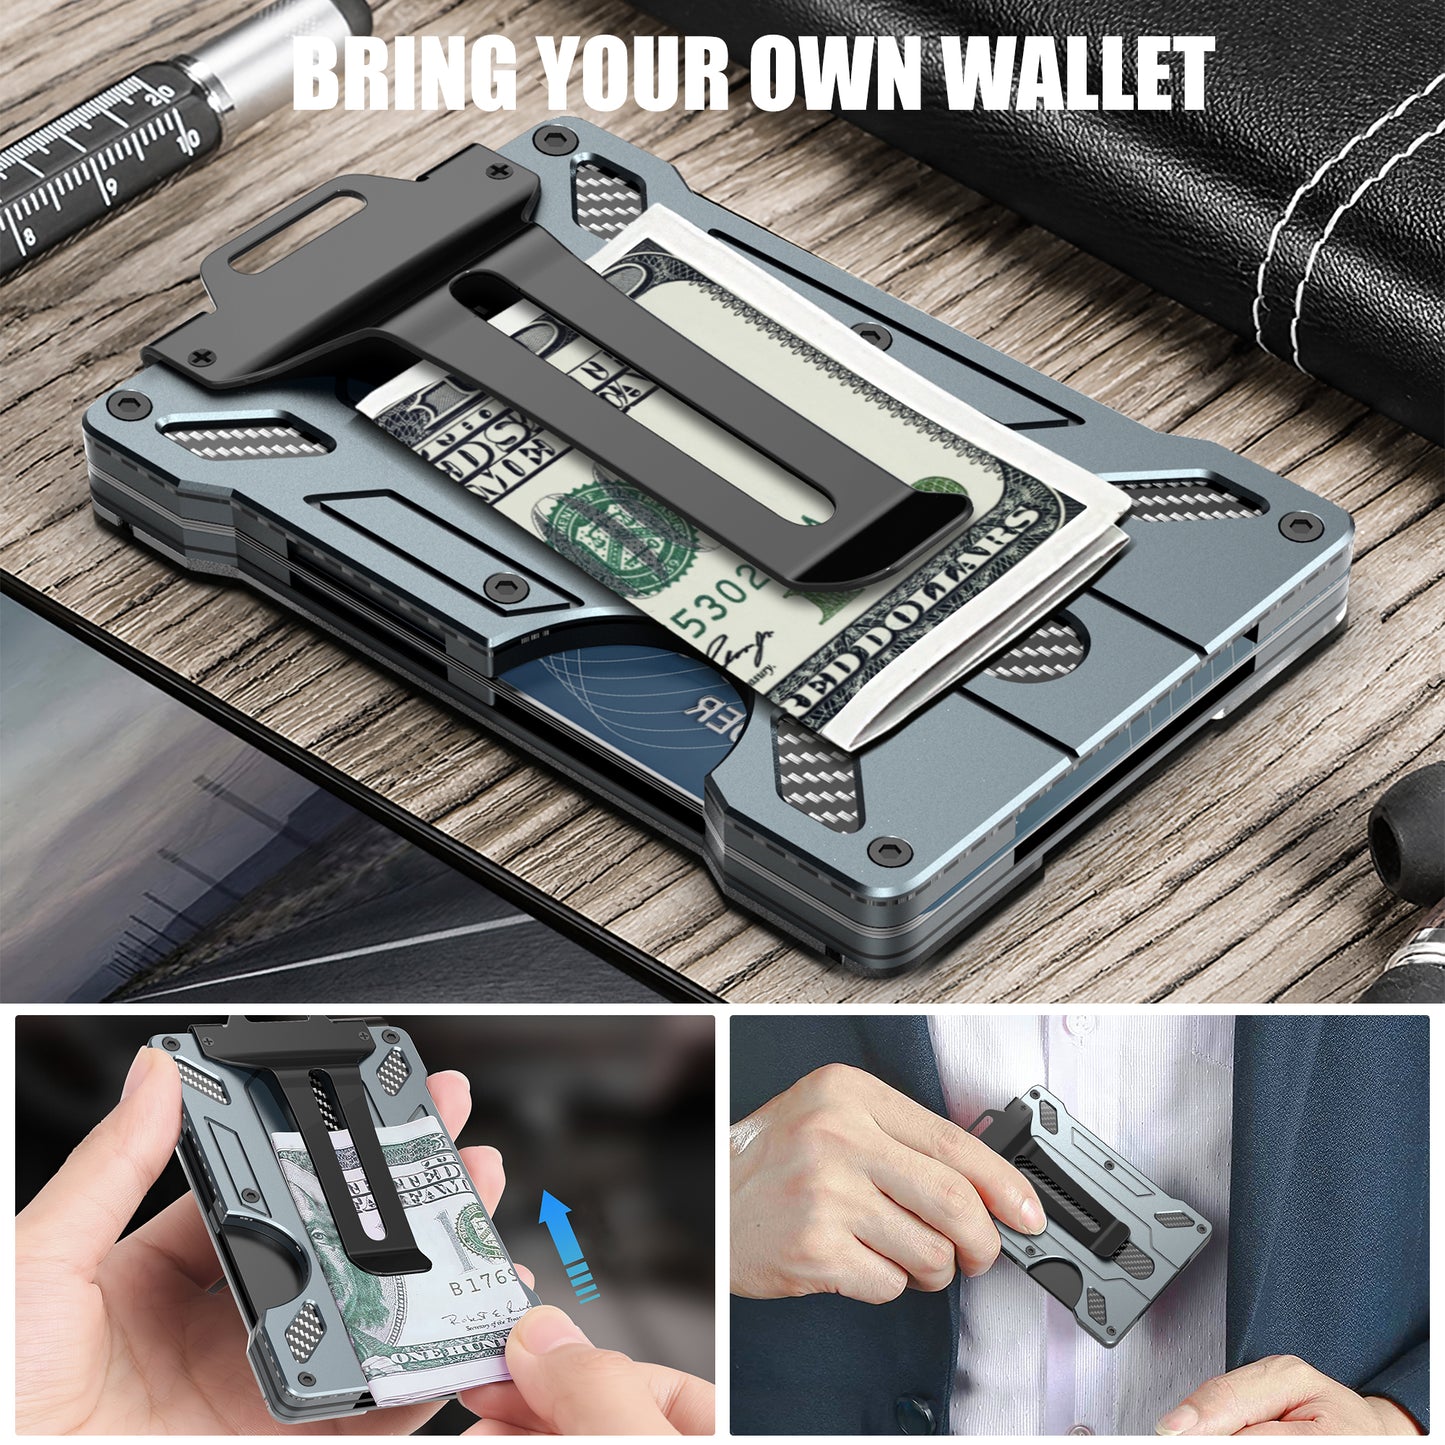 Wallet For Men - Slim Aluminum Metal Money Clip with 1 Clear window ID Badge Holder, RFID Blocking, Holds up 15 Cards with Cash Clip. Ultra-Thin Minimalist Wallet, dark grey